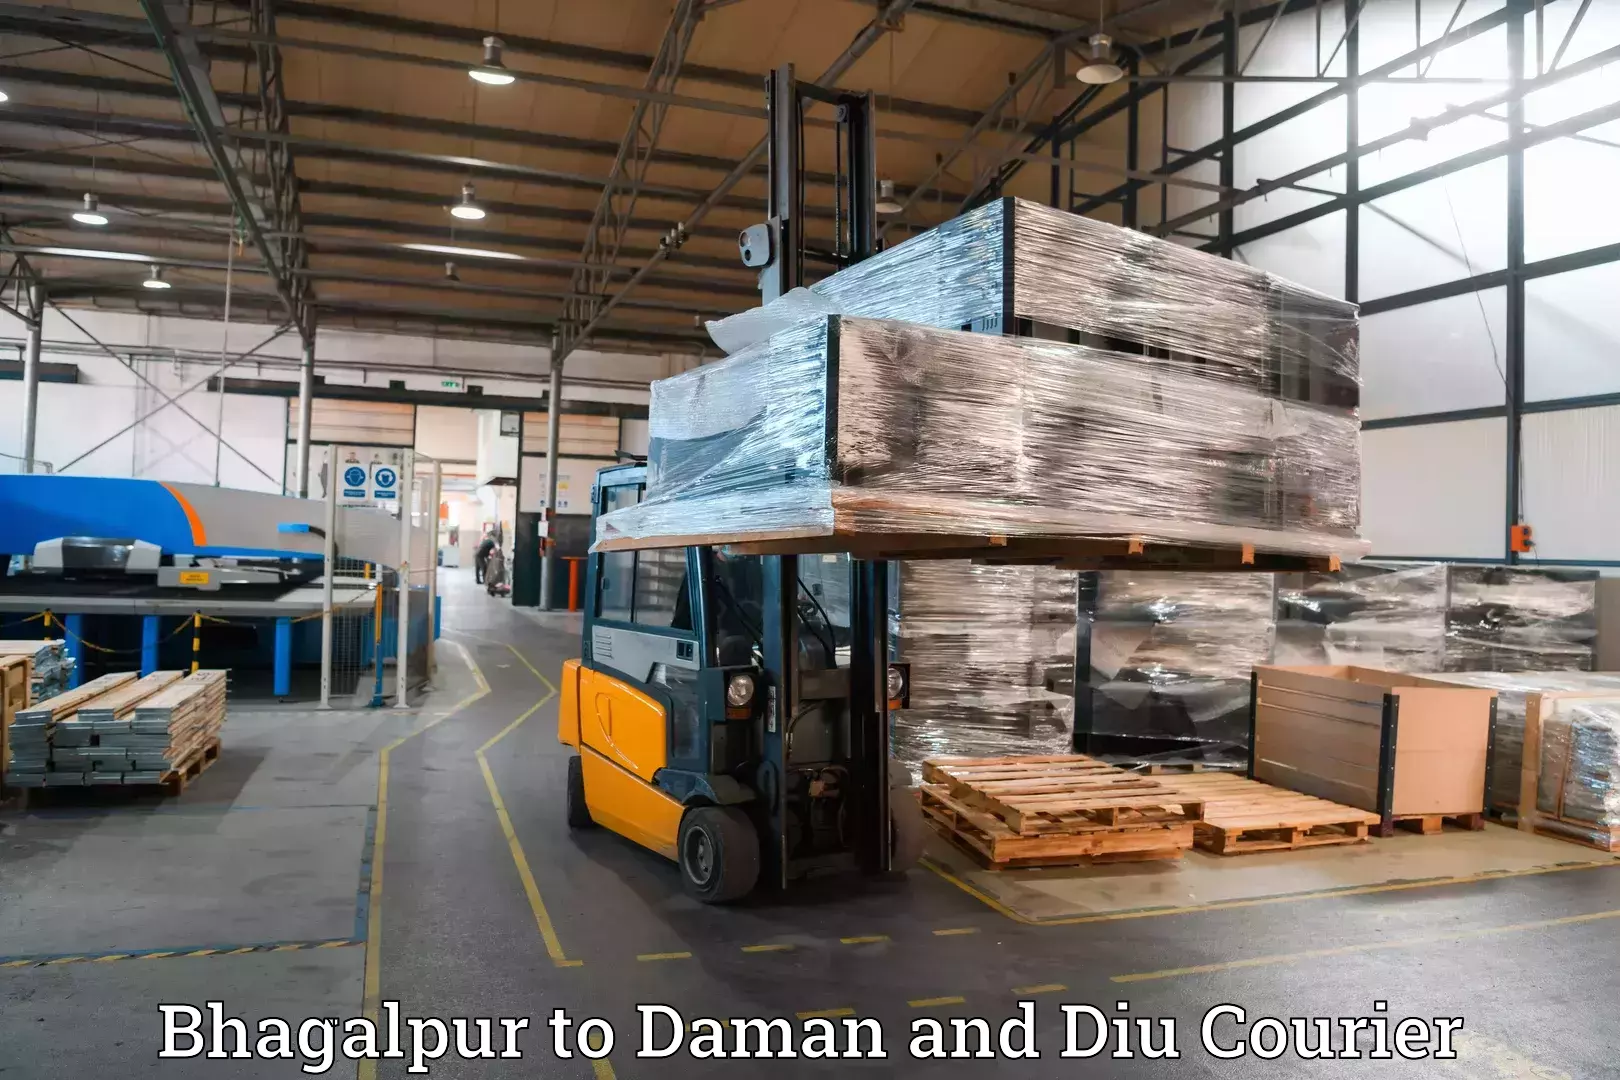 Luggage transport operations in Bhagalpur to Daman and Diu